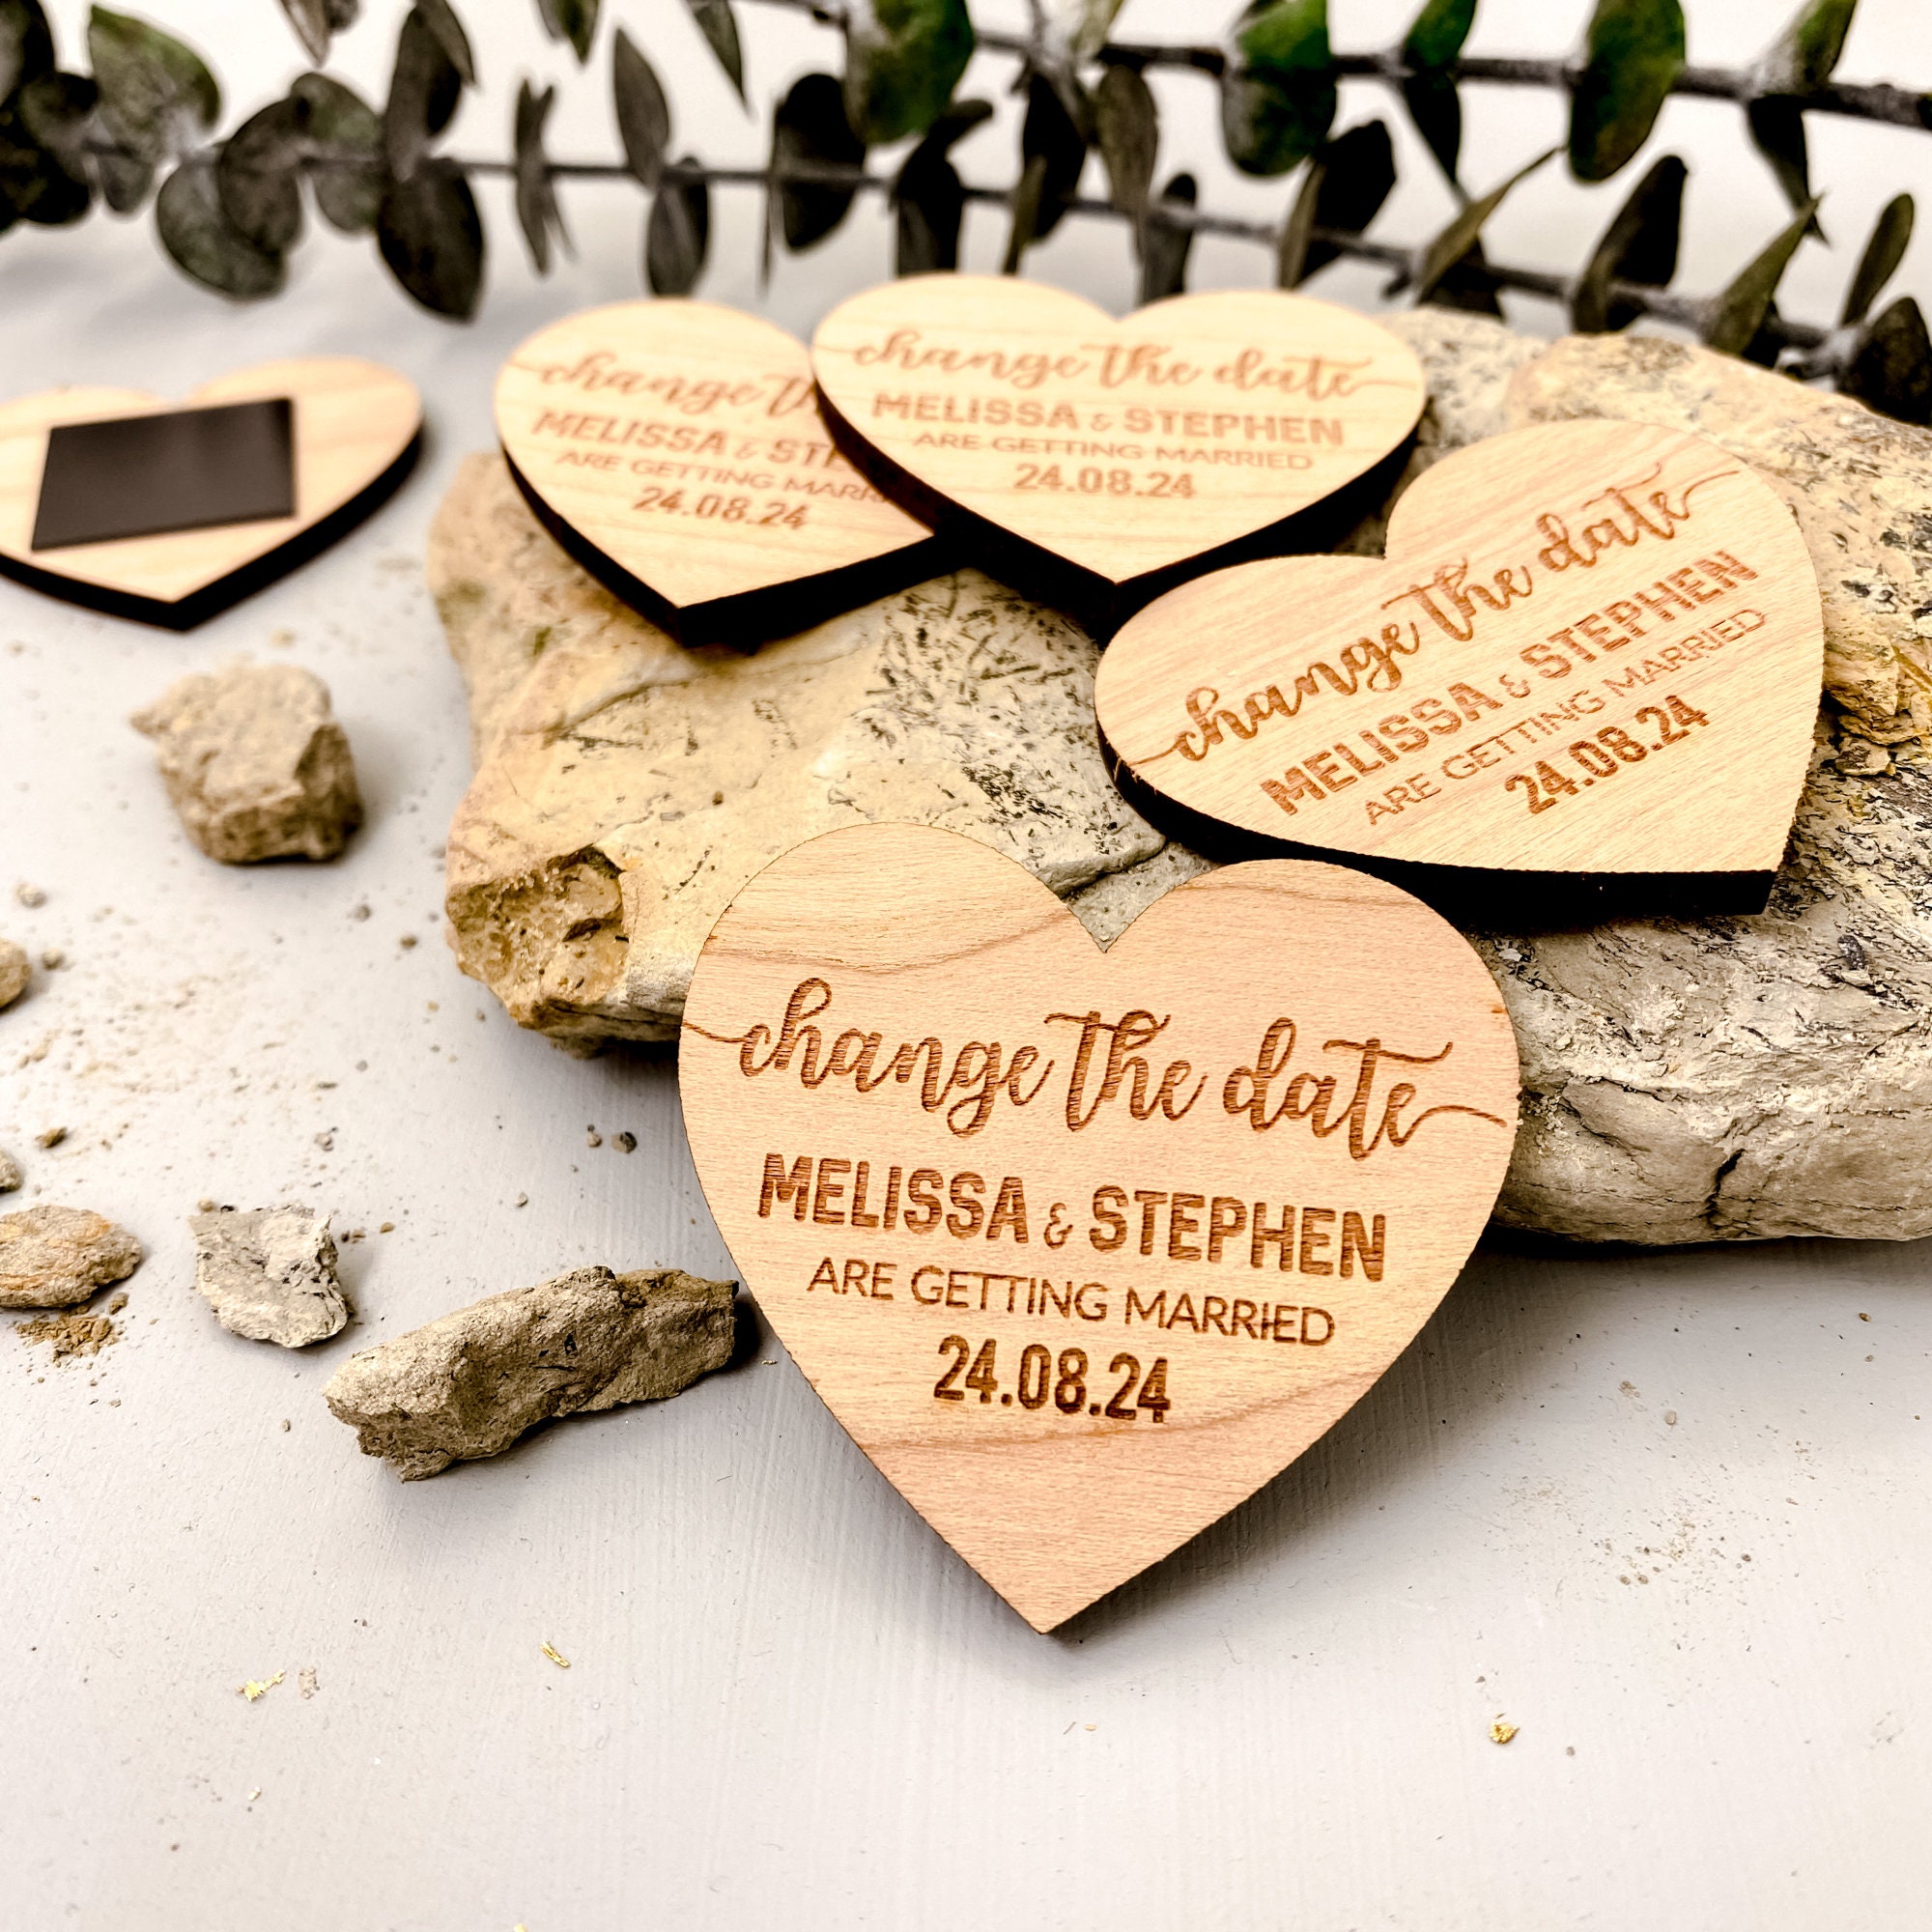 Personalize ADVENTURE Wooden Save the date Magnets, Rustic Wedding Magnet  favors,Custom Wedding Rudder Wooden Slice Magnets